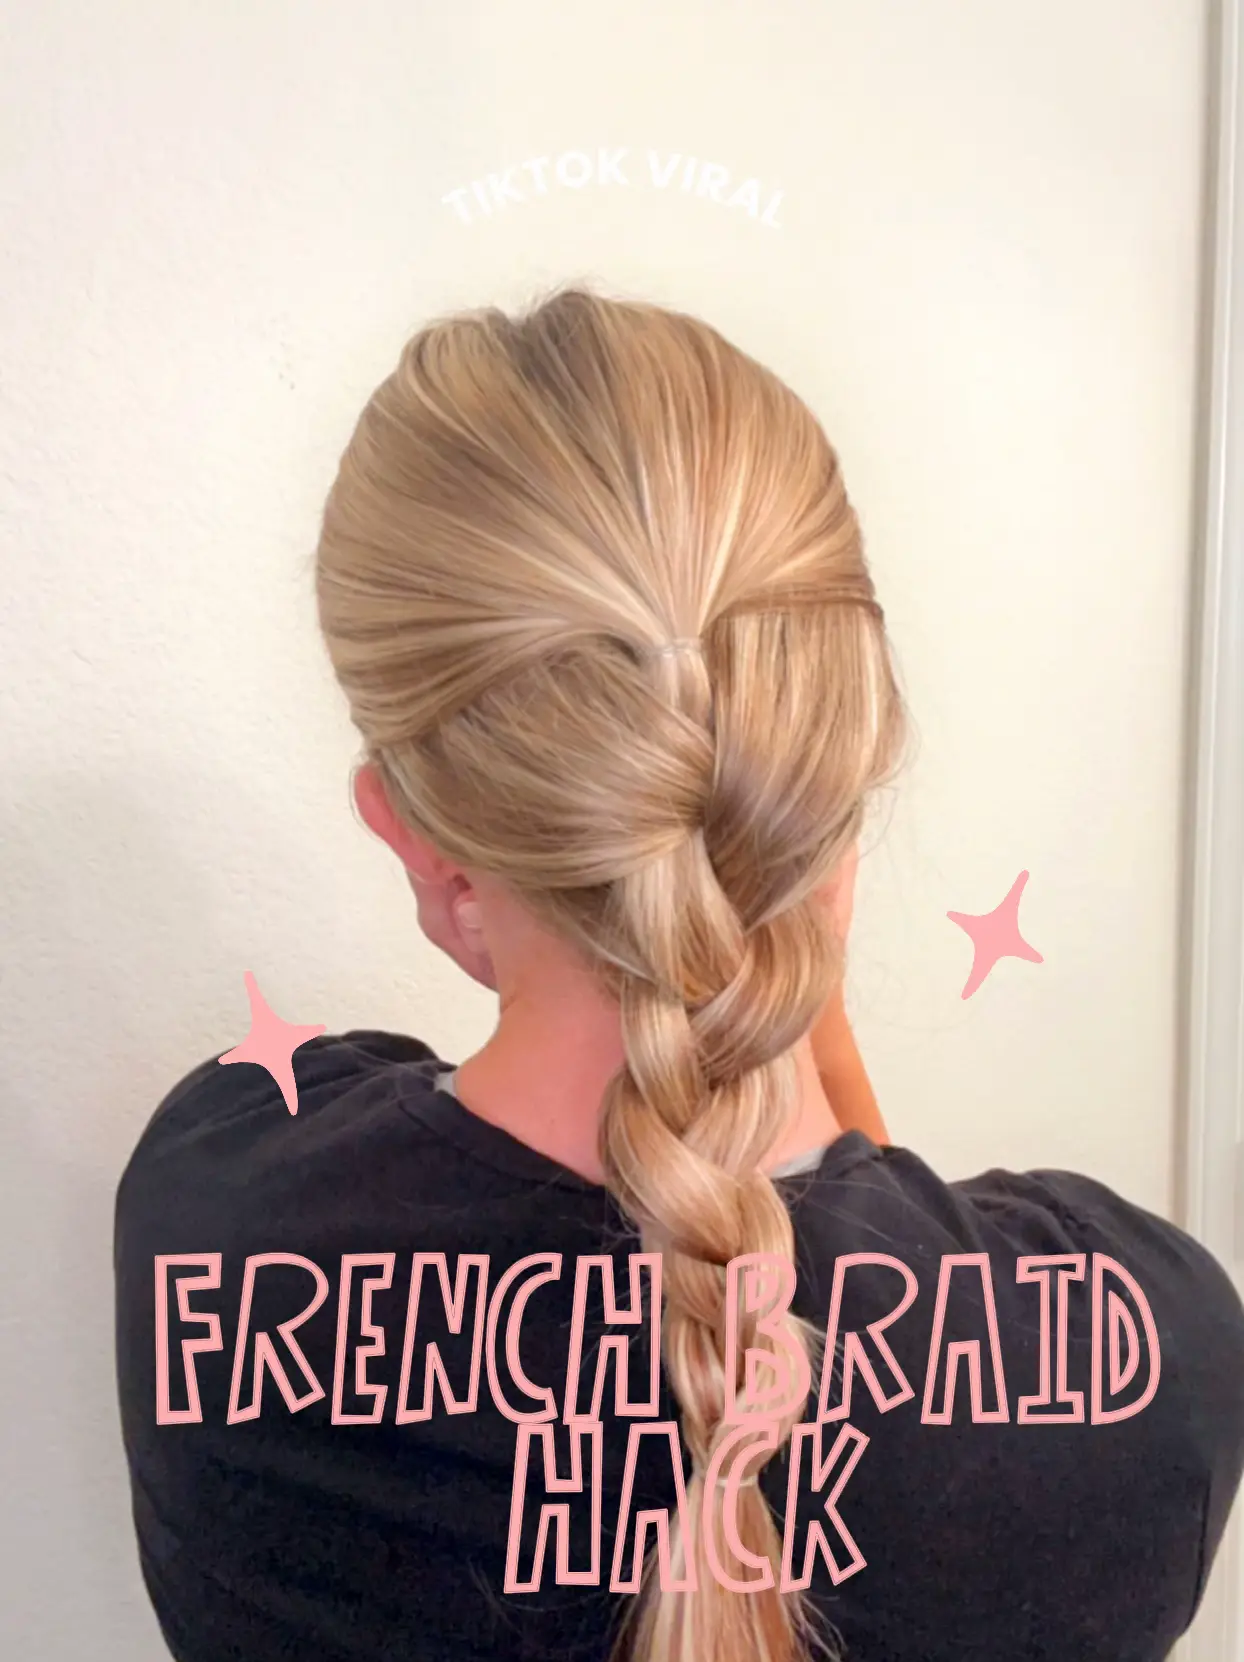 Here's a tip on how to braid your front pieces #hairstyle #hair